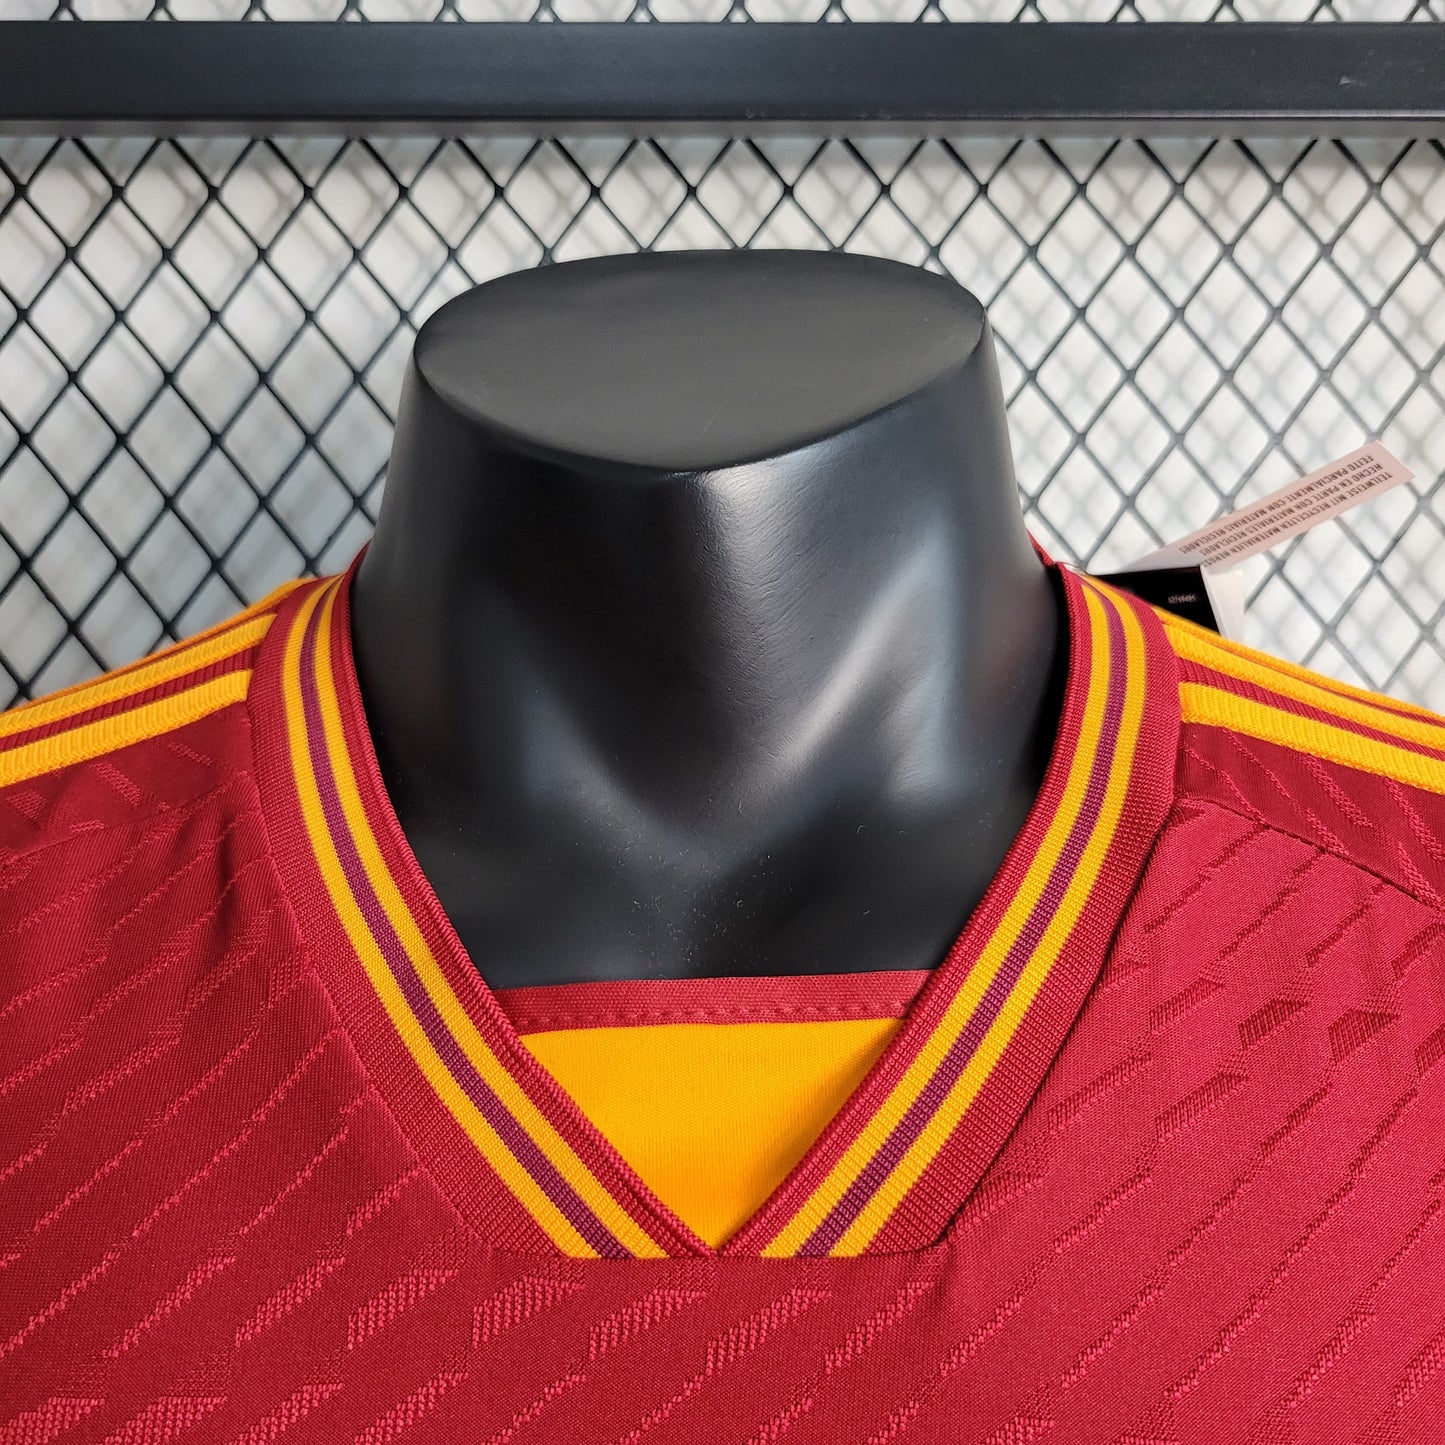 AS Roma 23-24 Home (Player)